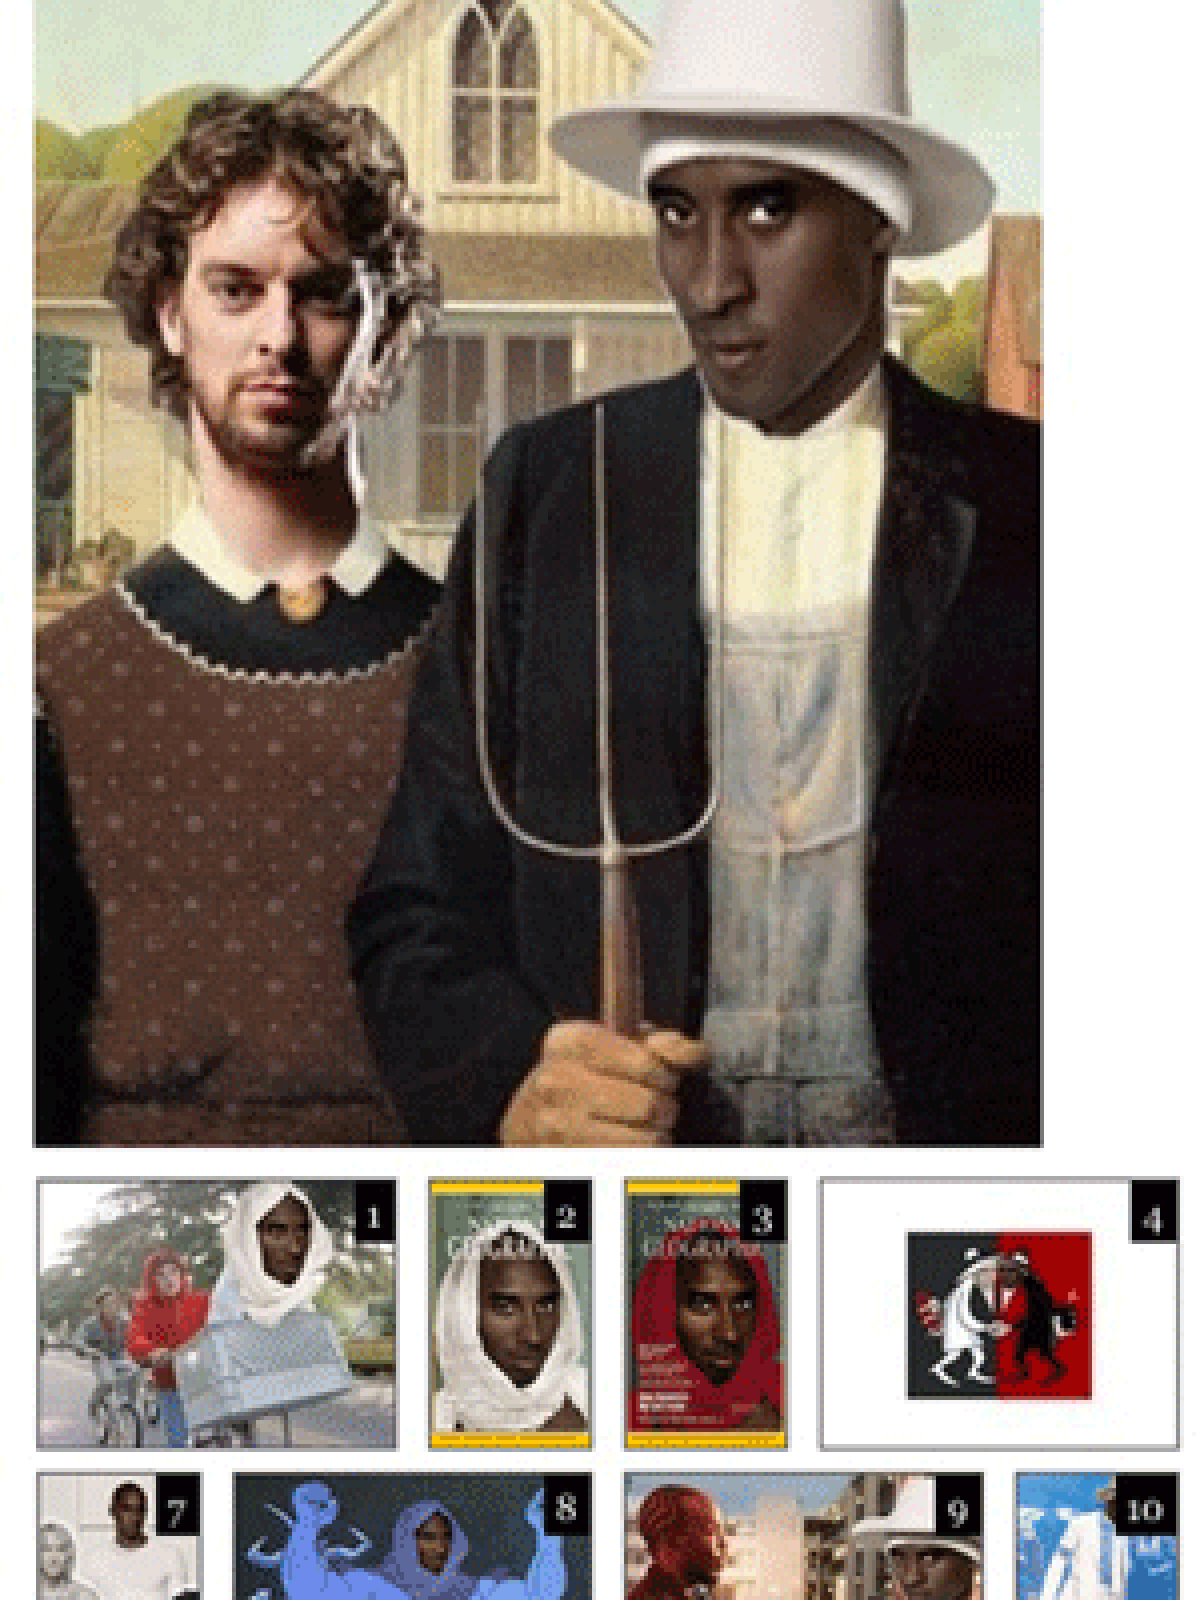 Kobe Bryant photo parody contest on the website deadspin.com